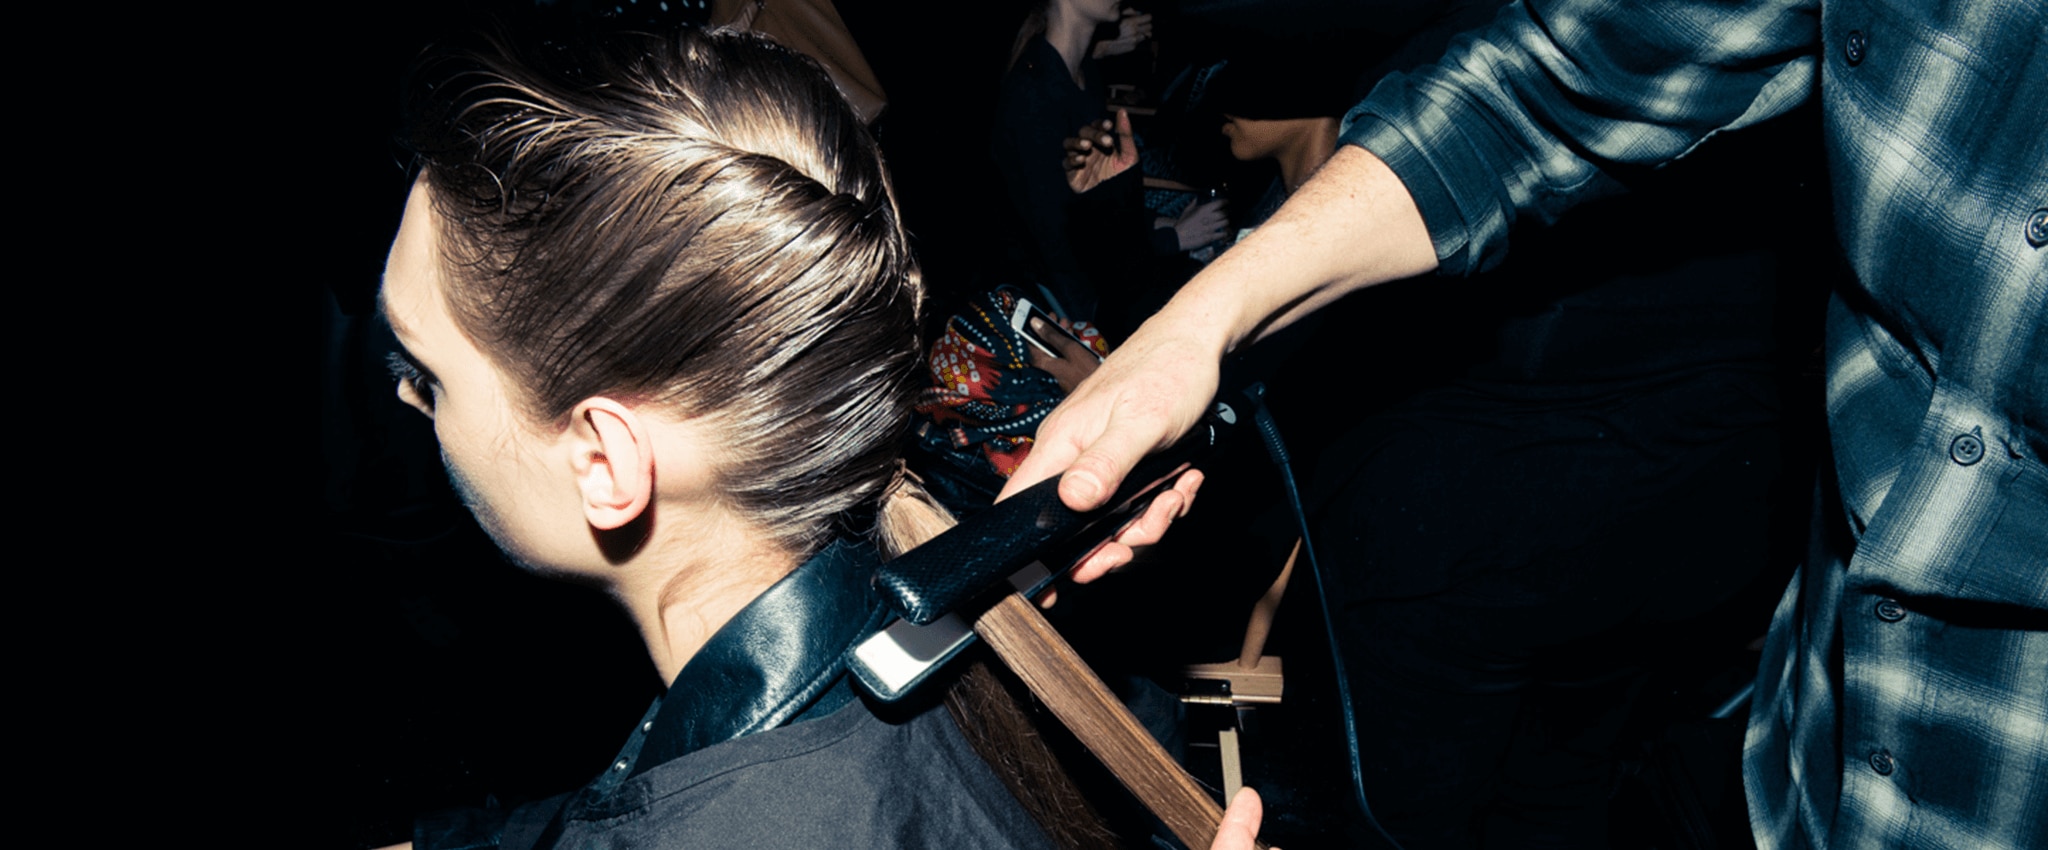 Backstage at a fashion show, a stylist straightens a model's long brown hair